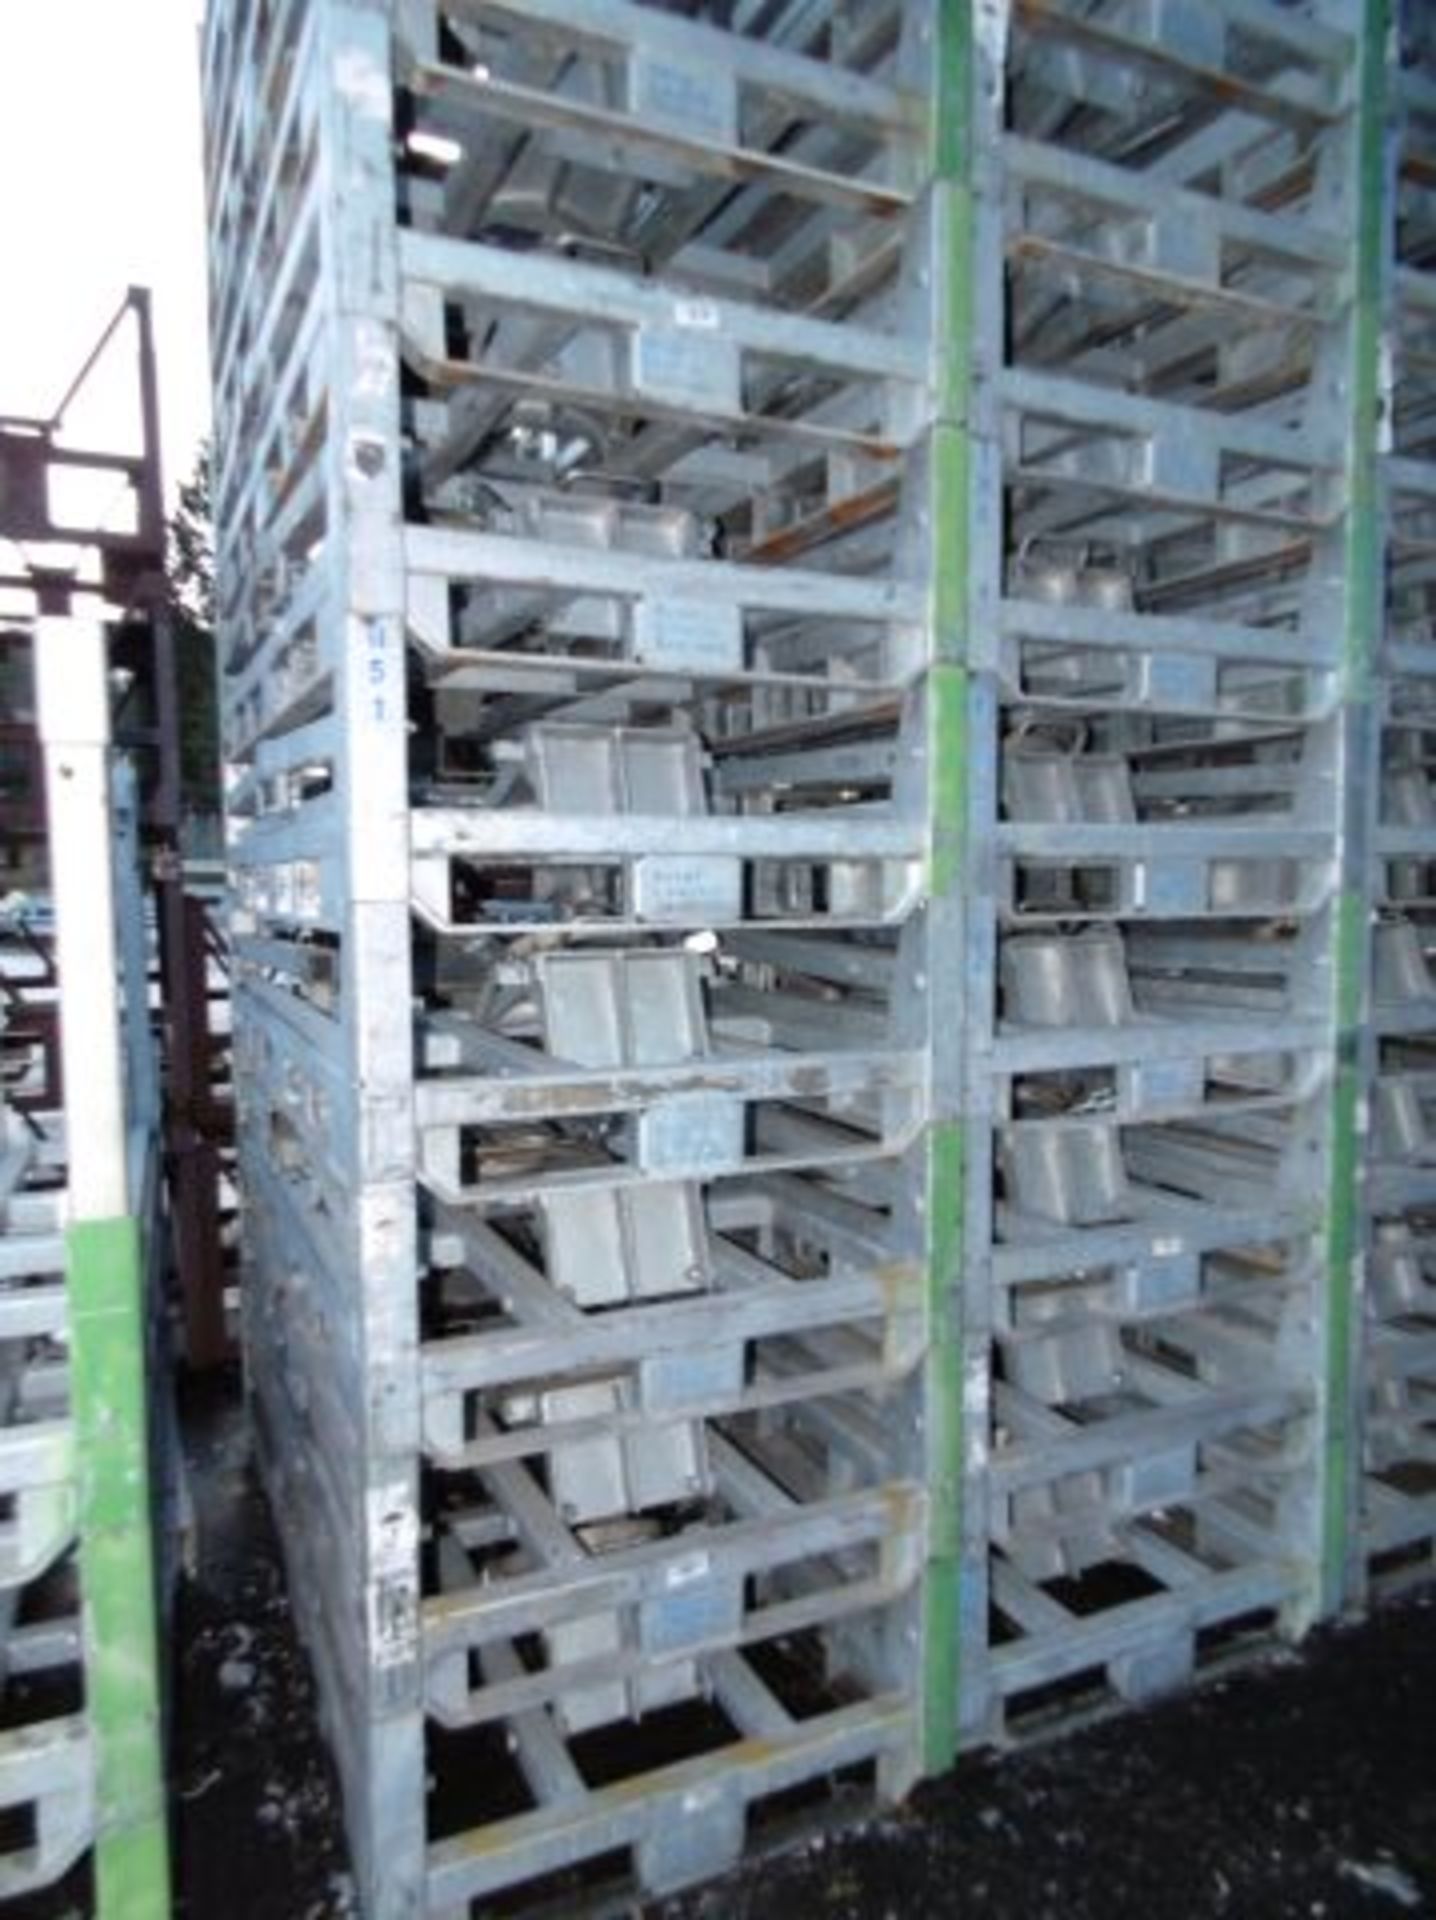 * 20 x Folding/Stackable Galvanised Steel Stillages; each 1950 x 1000mm. Loaded onto Buyer's - Image 2 of 2